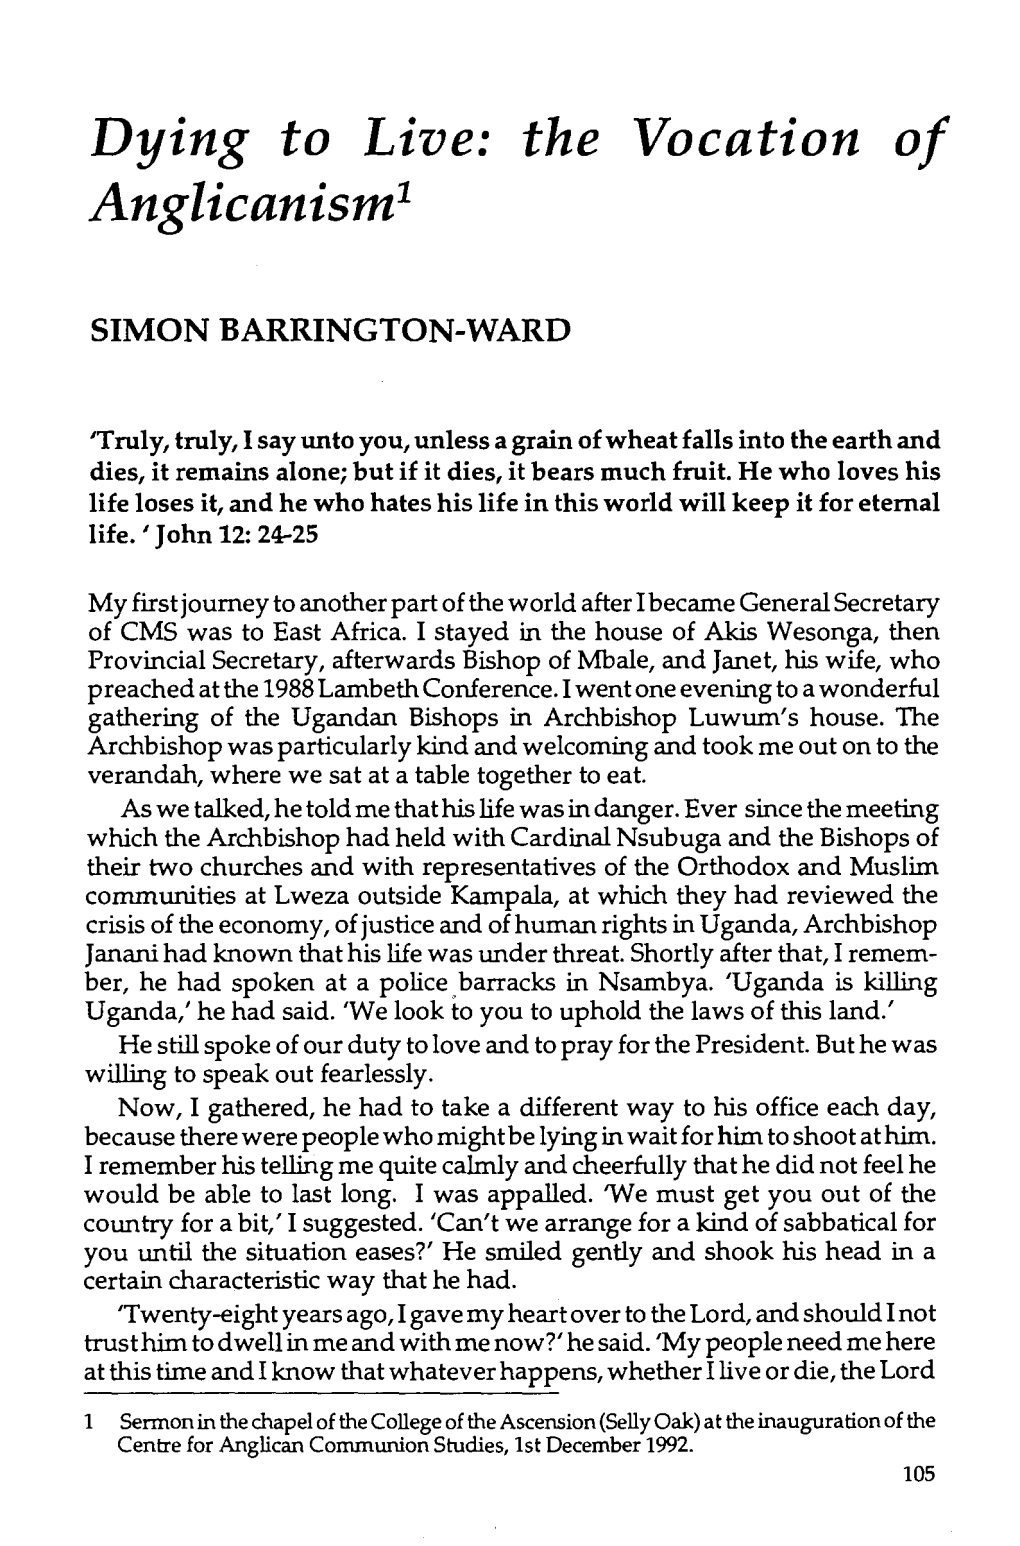 Simon Barrington-Ward, "Dying to Live: the Vocation of Anglicanism,"